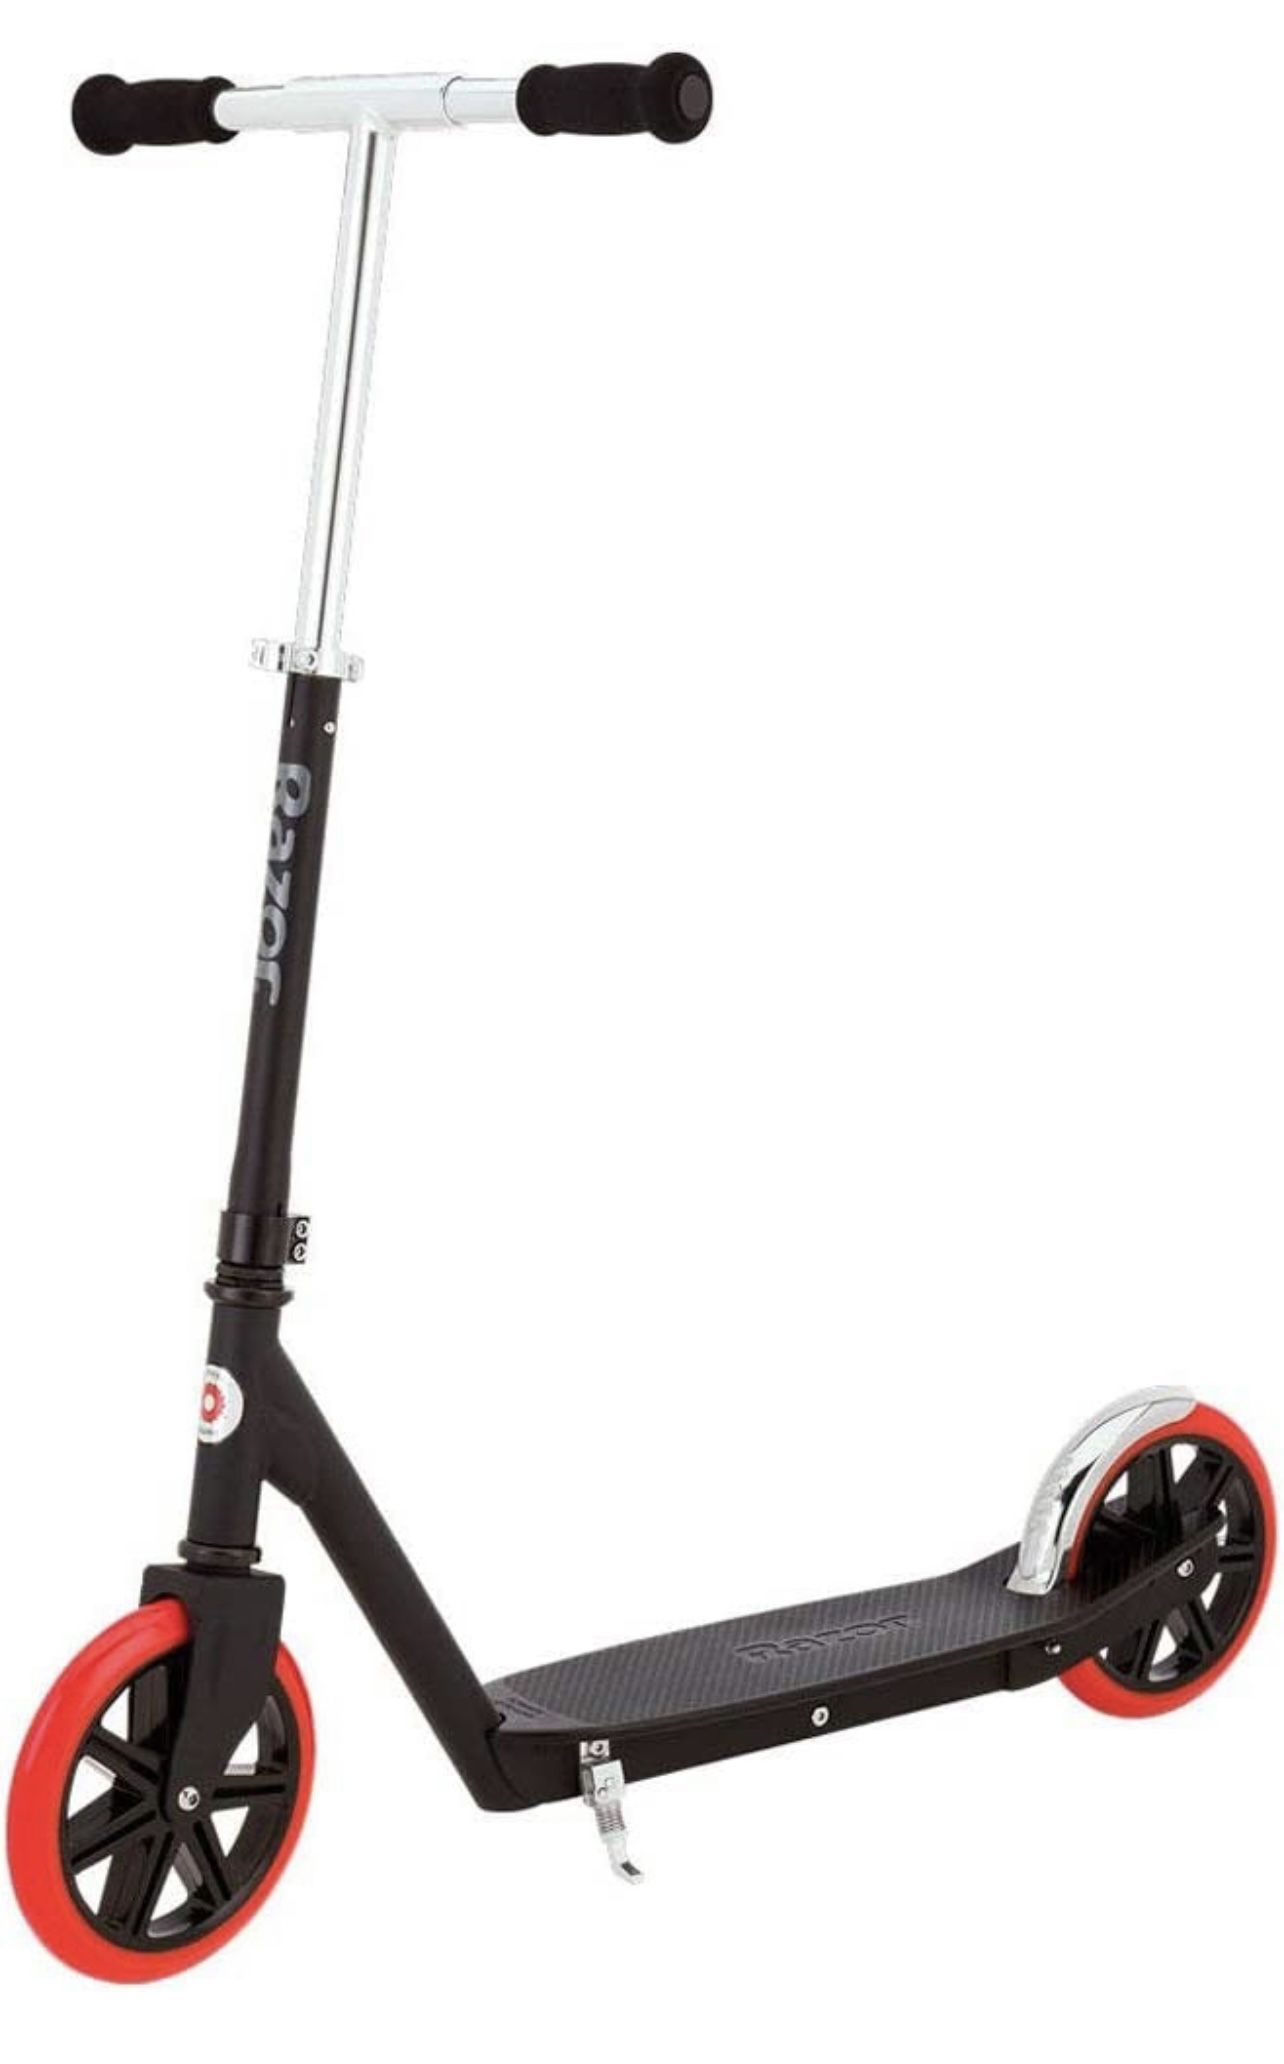 Two (2) Razor Carbon Lux Kick Scooter, Black/Red. Hardly used at all. $40 each or $70 for two